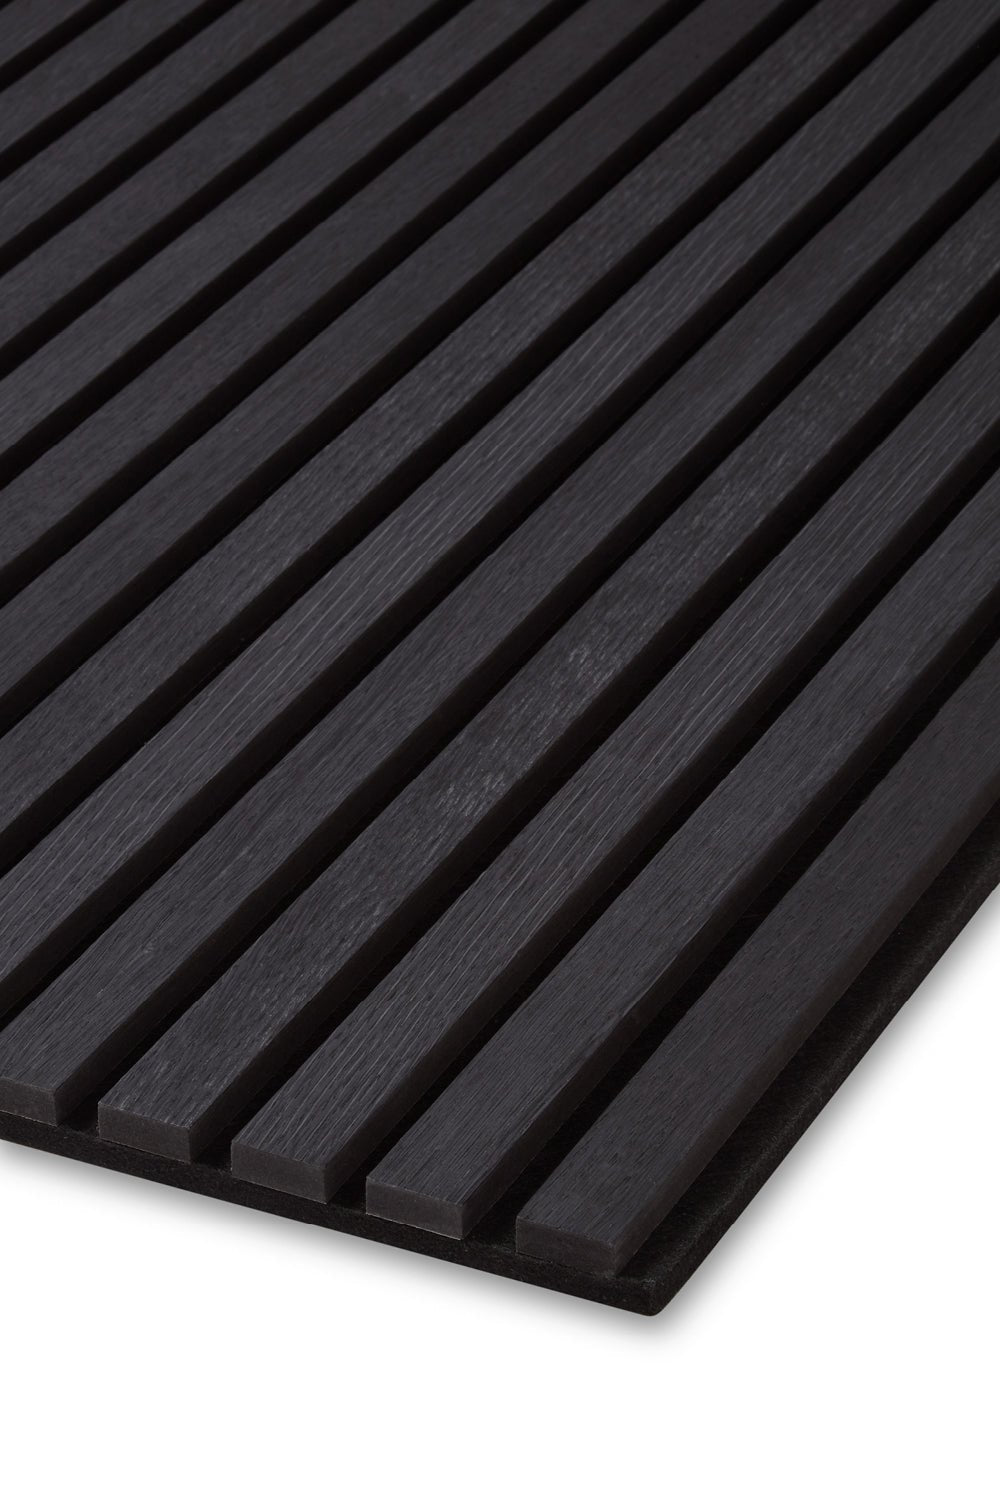 A close up of the Charcoal Black Acoustic SlatWall Panel corner from Naturewall.

